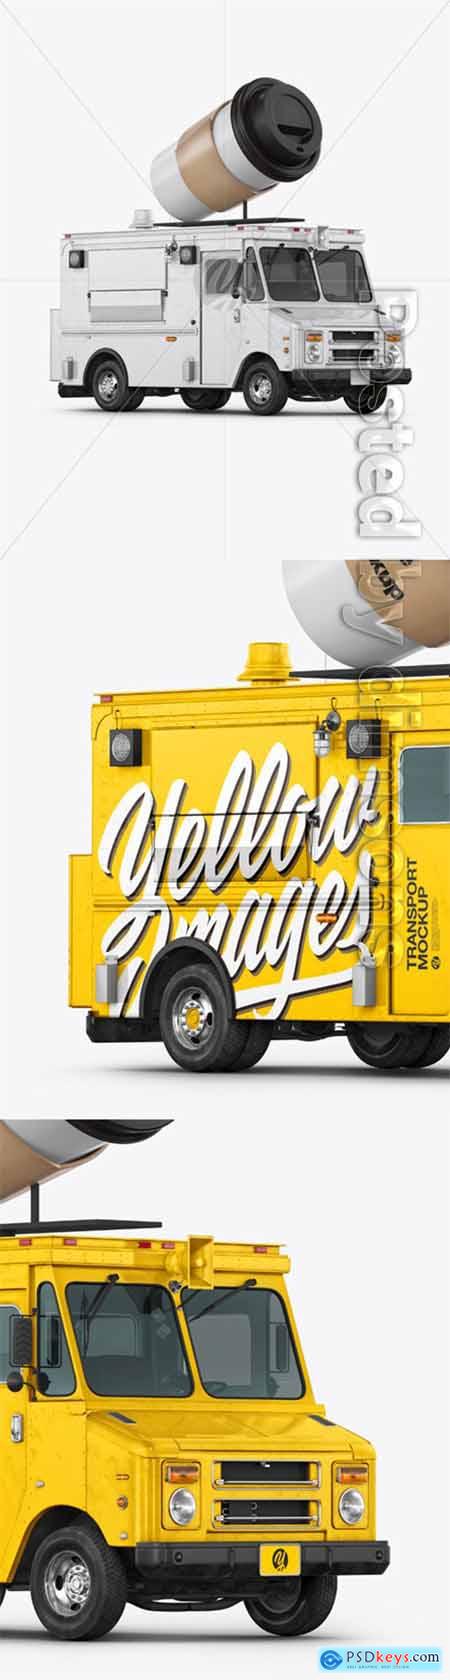 Foodtruck with Coffee Cup Mockup - Half Side View 36189